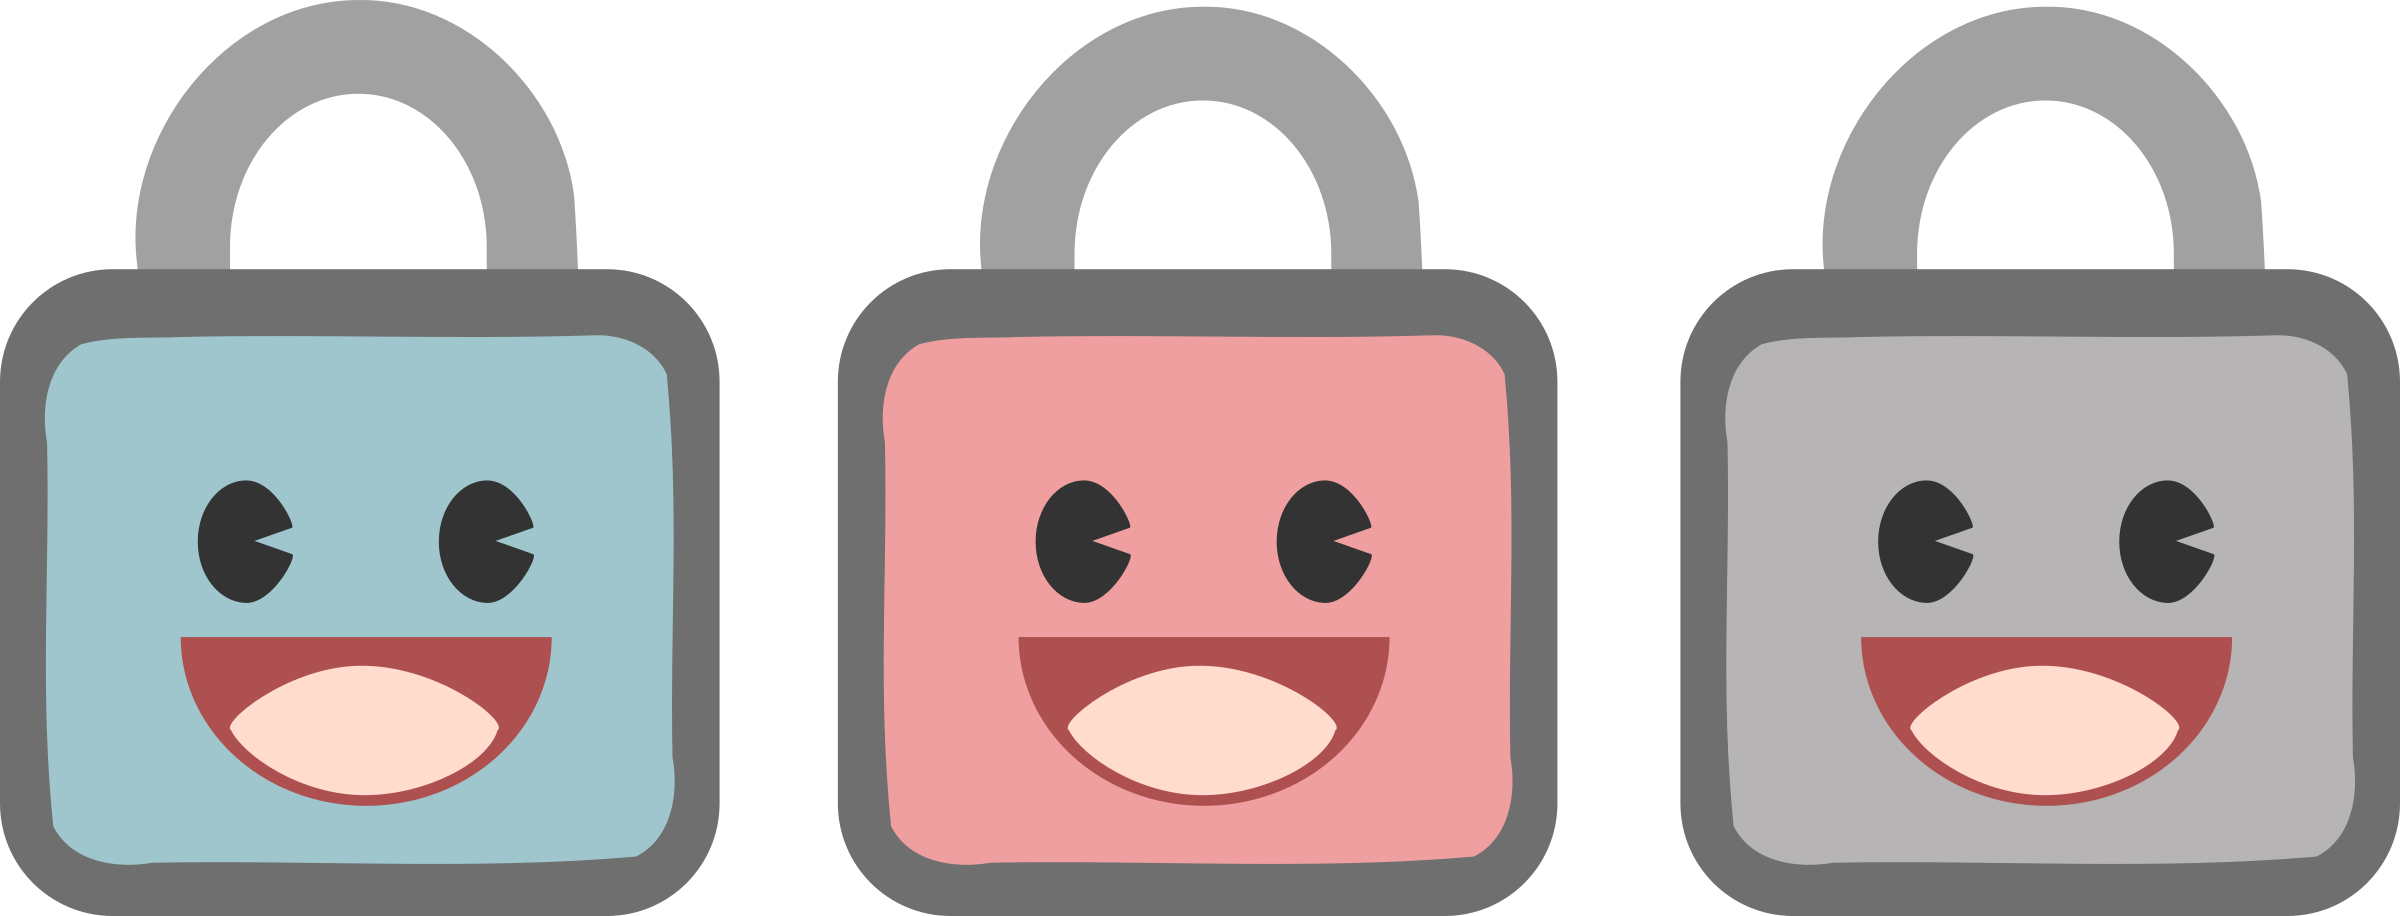 Cute lock icons Icons PNG - Free PNG and Icons Downloads